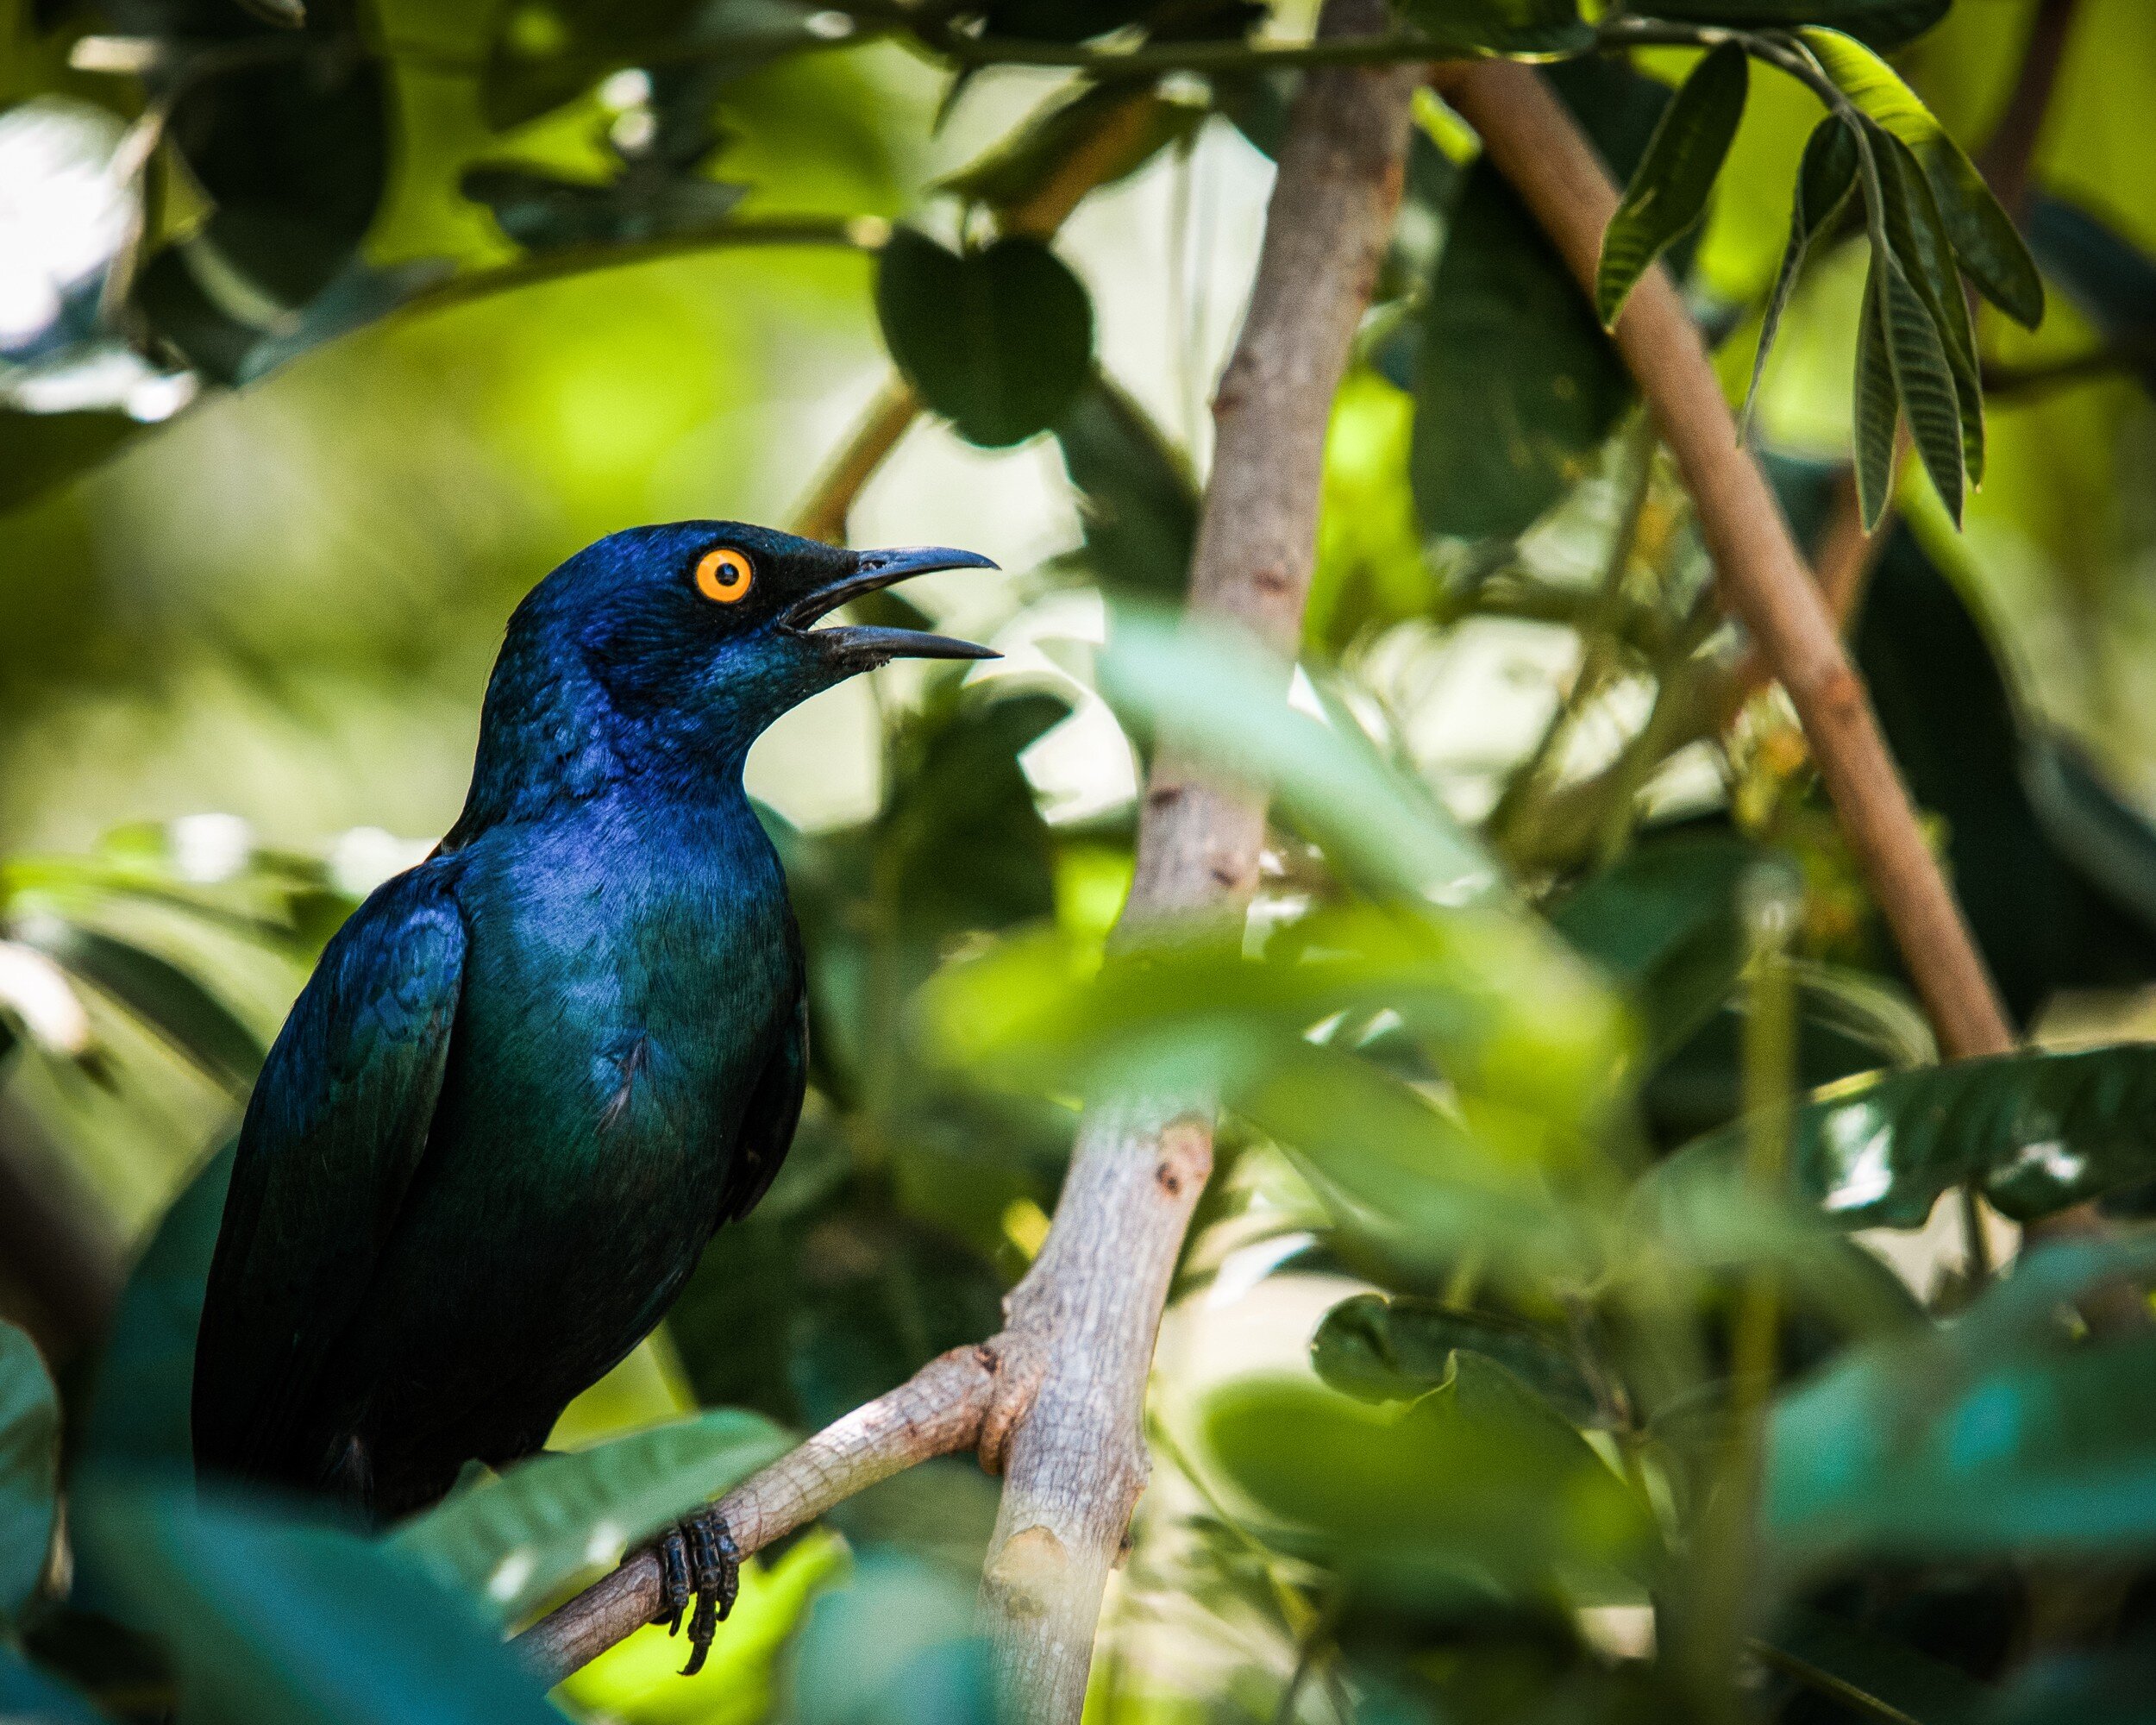 Cape Glossy Starling #2, 2010